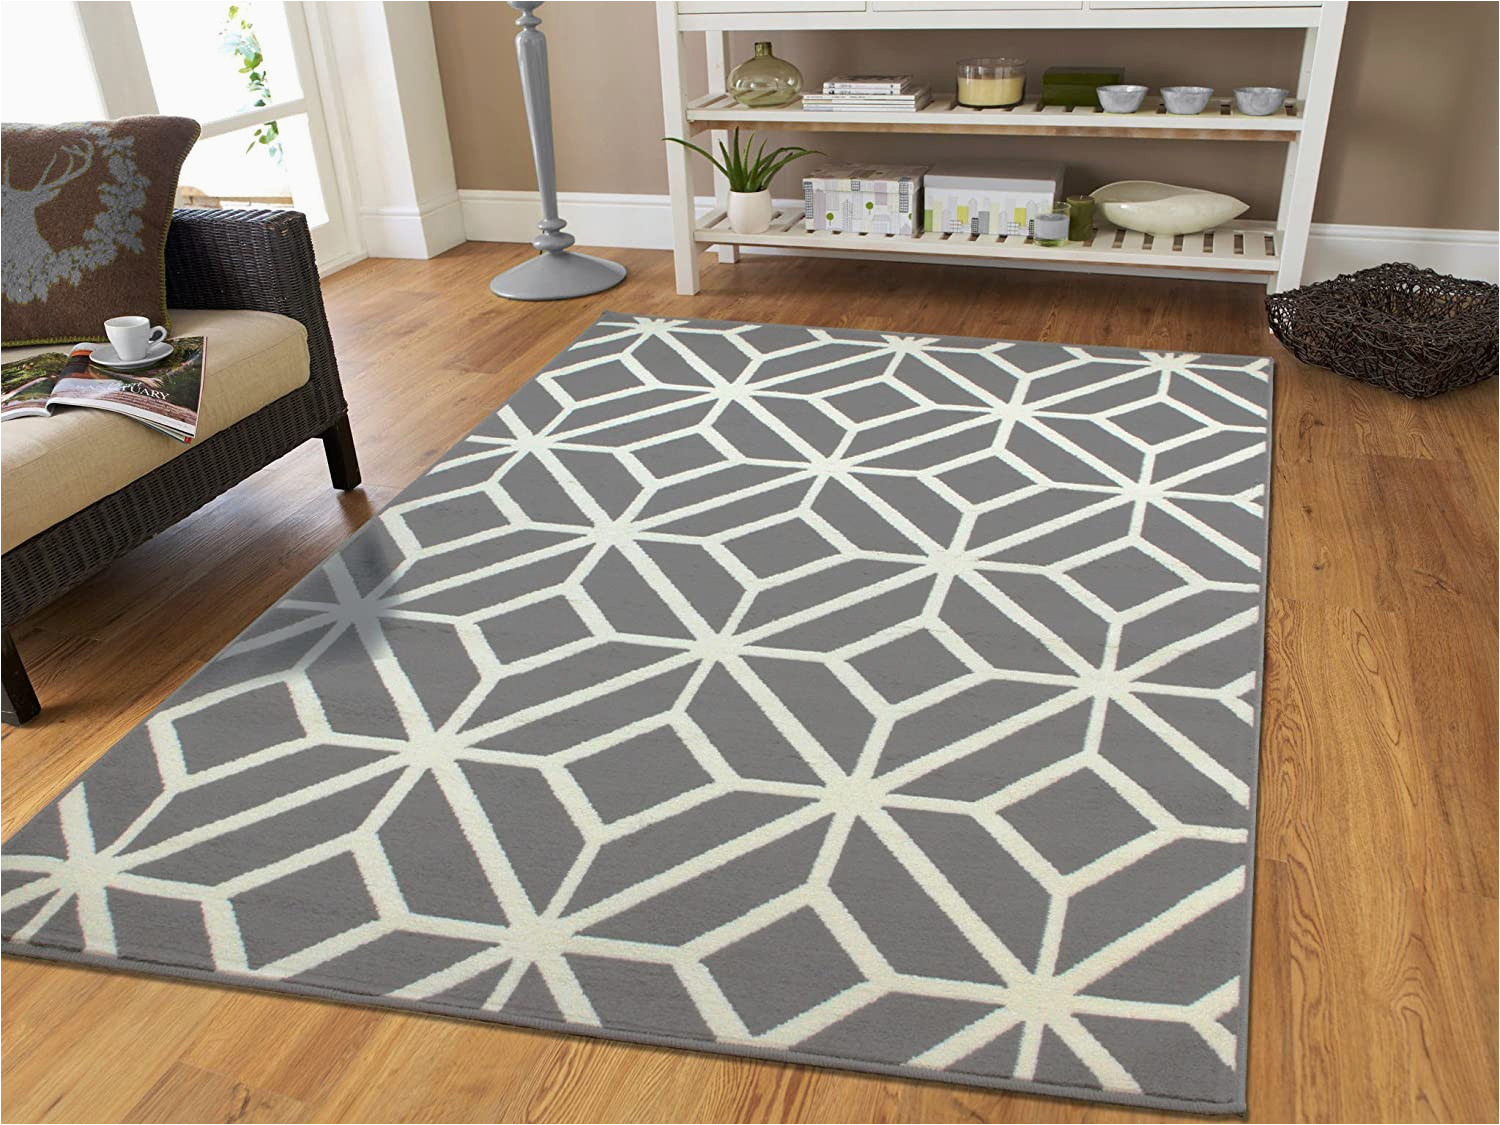 2QAFWDPG contemporary rugs for living room grey and white moroccan trellis area rug carpet 5 x 7 feet gray